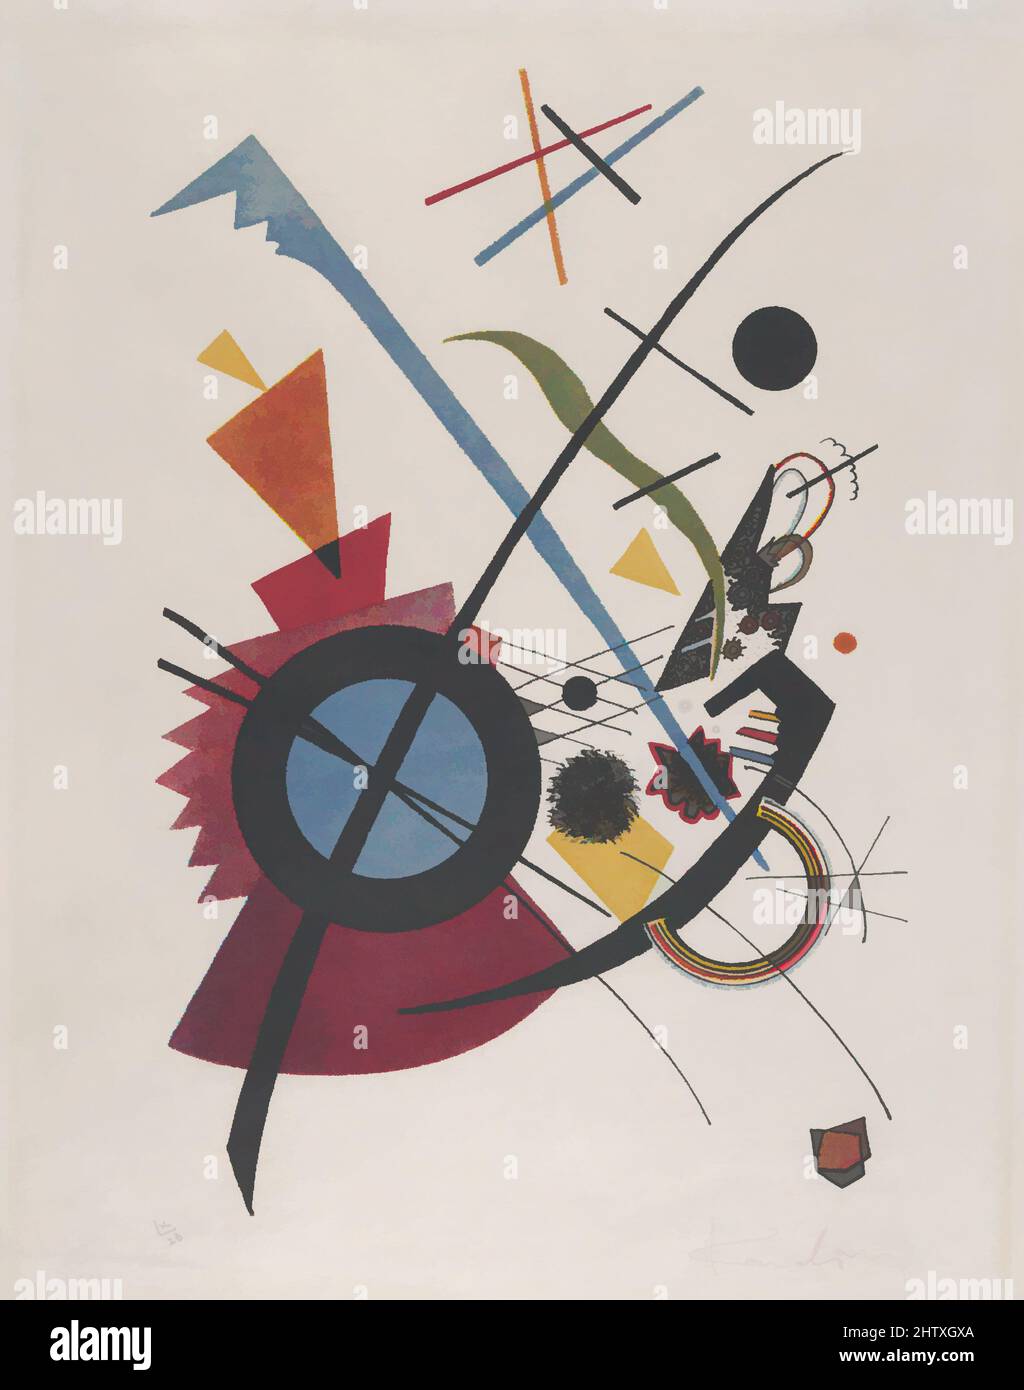 Art inspired by Violett, 1923, Lithograph in red, yellow, blue and black, 11 7/16 x 7/12 inches (29.1 x 19.1 cm), Prints, Vasily Kandinsky (French (born Russia), Moscow 1866–1944 Neuilly-sur-Seine, Classic works modernized by Artotop with a splash of modernity. Shapes, color and value, eye-catching visual impact on art. Emotions through freedom of artworks in a contemporary way. A timeless message pursuing a wildly creative new direction. Artists turning to the digital medium and creating the Artotop NFT Stock Photo